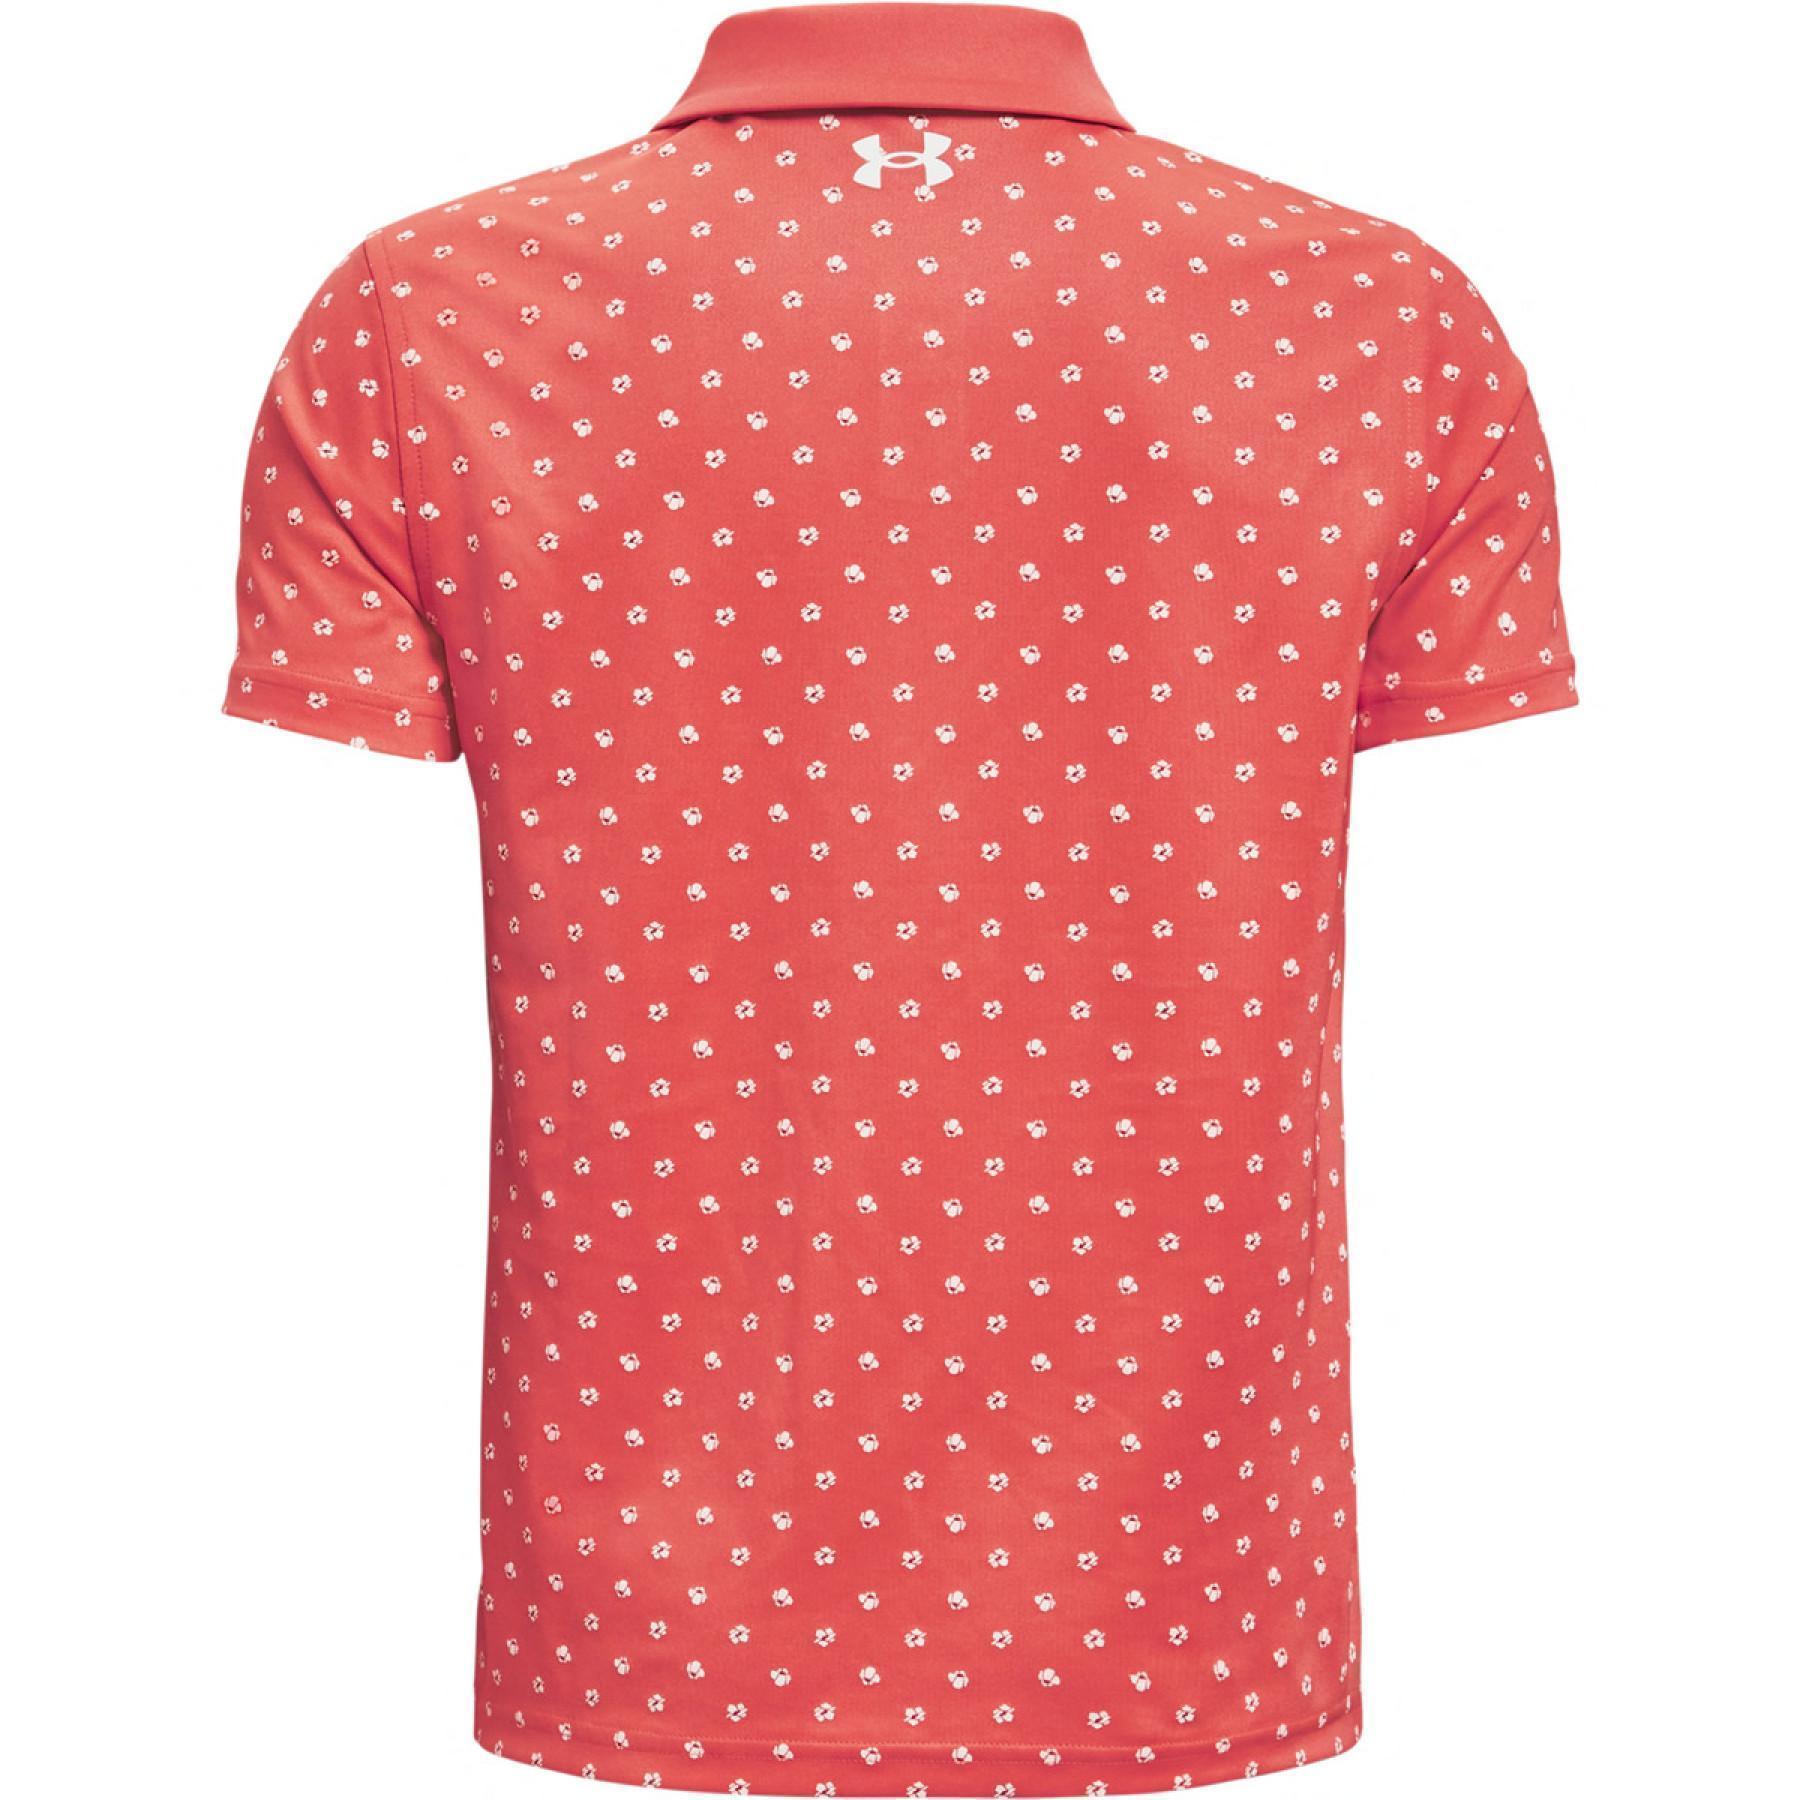 Chico del polo Under Armour performance poppie